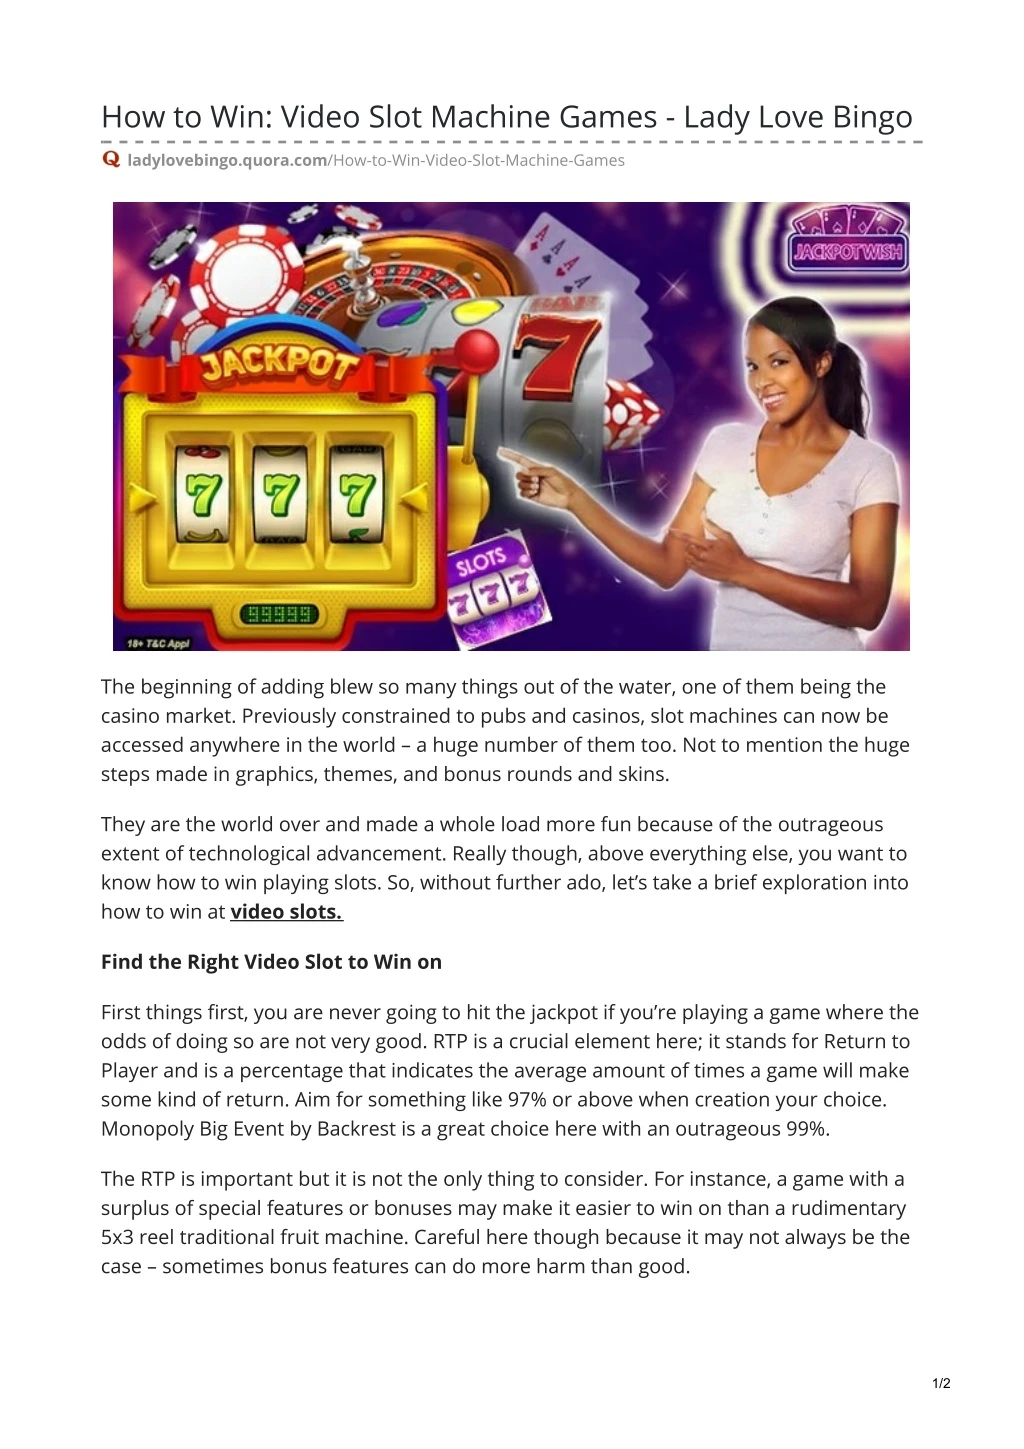 how to win video slot machine games lady love